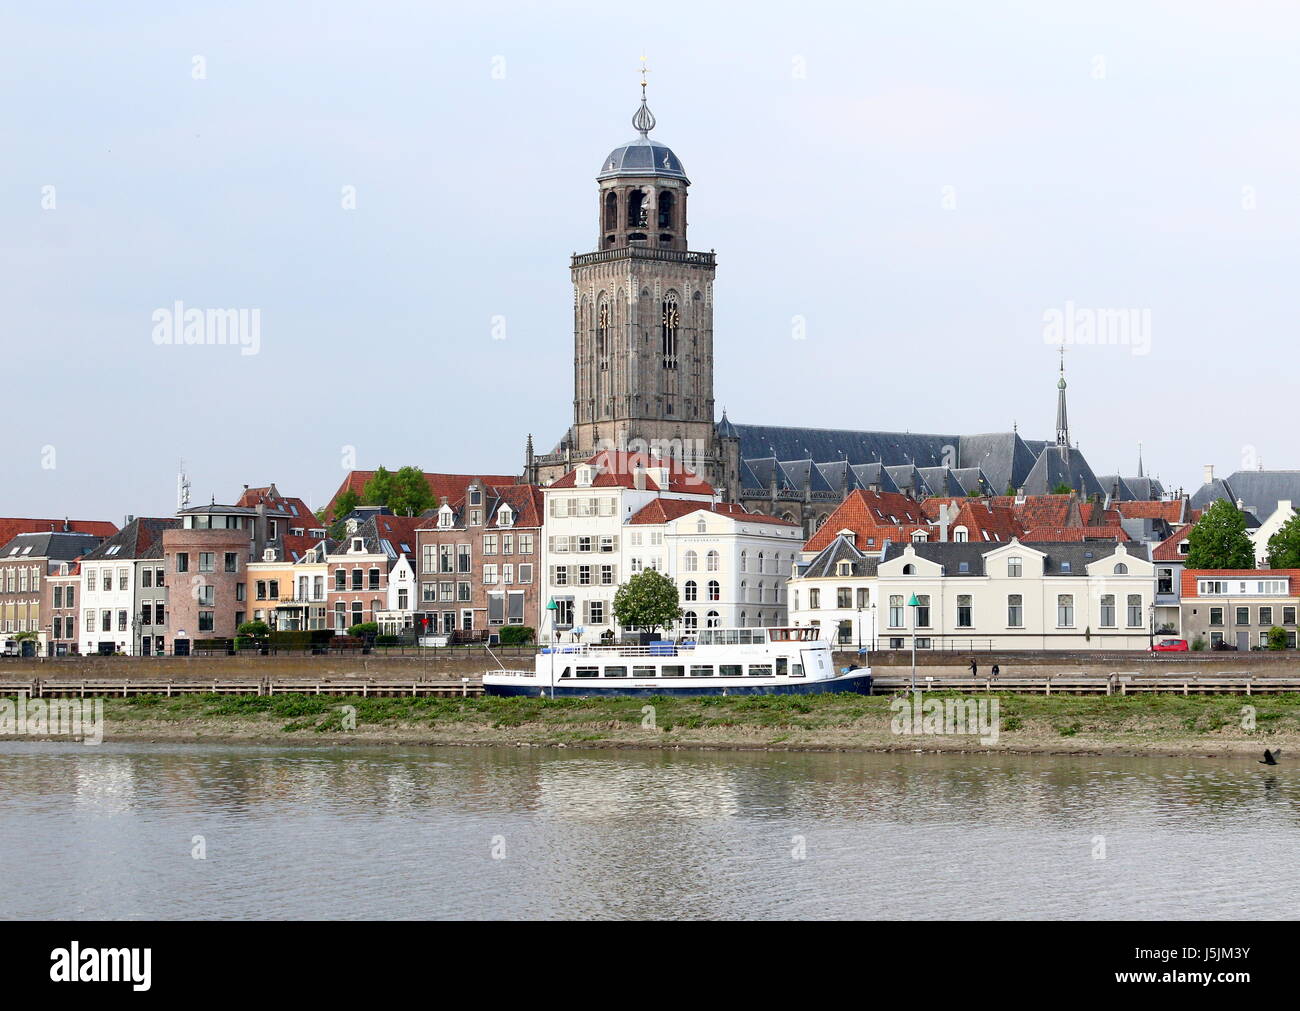 Panorama of the IJssel River at Deventer, Netherlands. City skyline with St. Lebuinus Church (Grote or Lebuïnus Kerk). Stock Photo